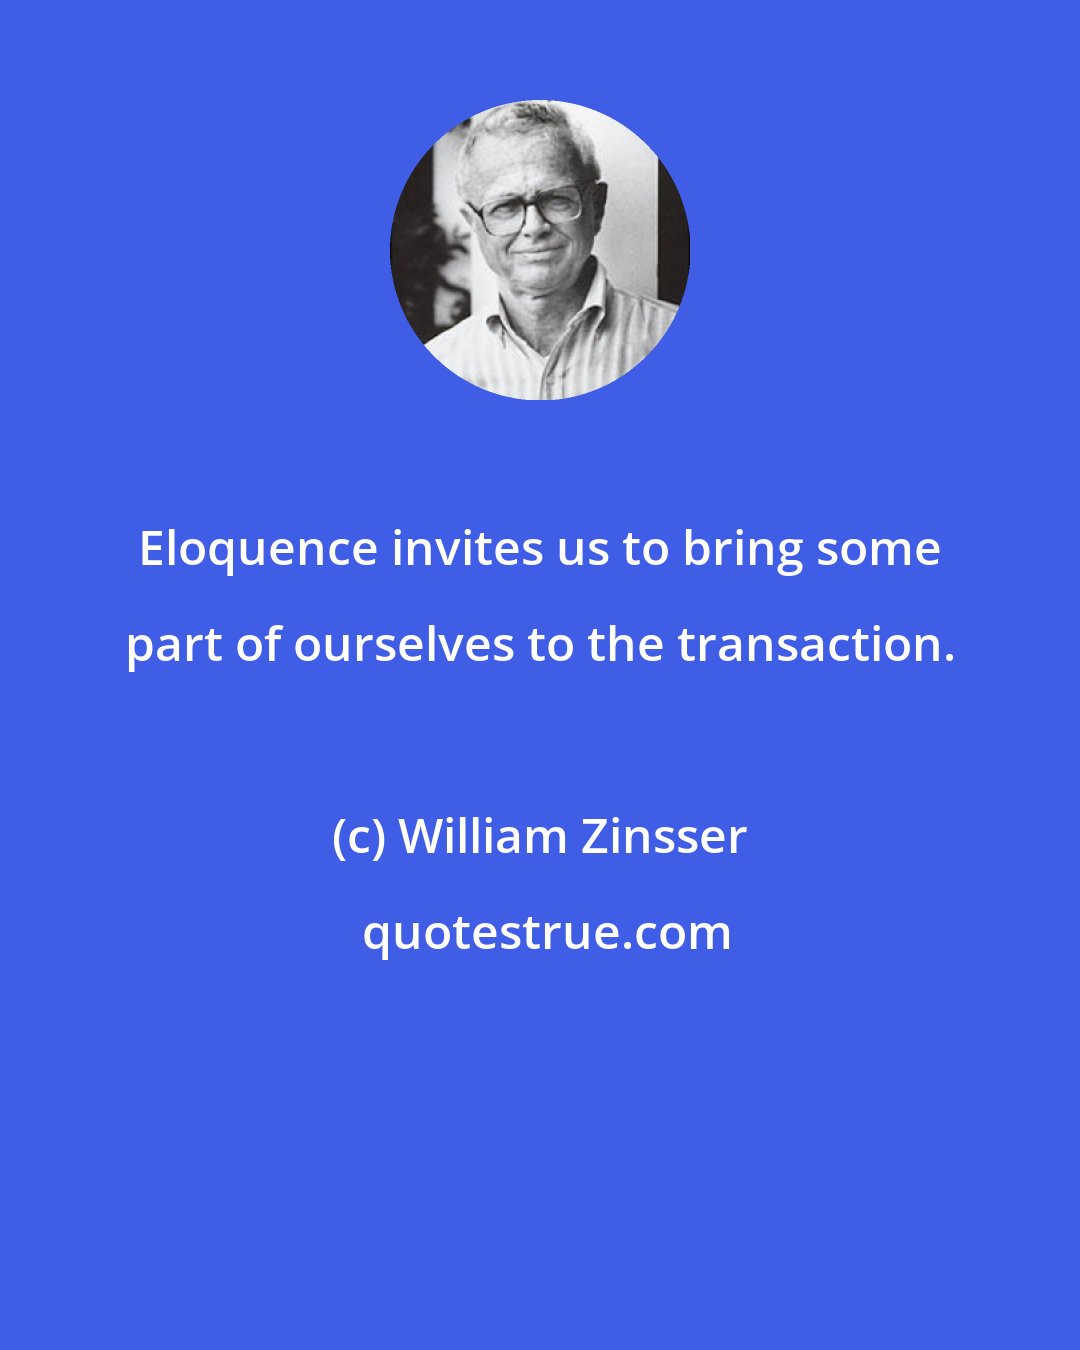 William Zinsser: Eloquence invites us to bring some part of ourselves to the transaction.